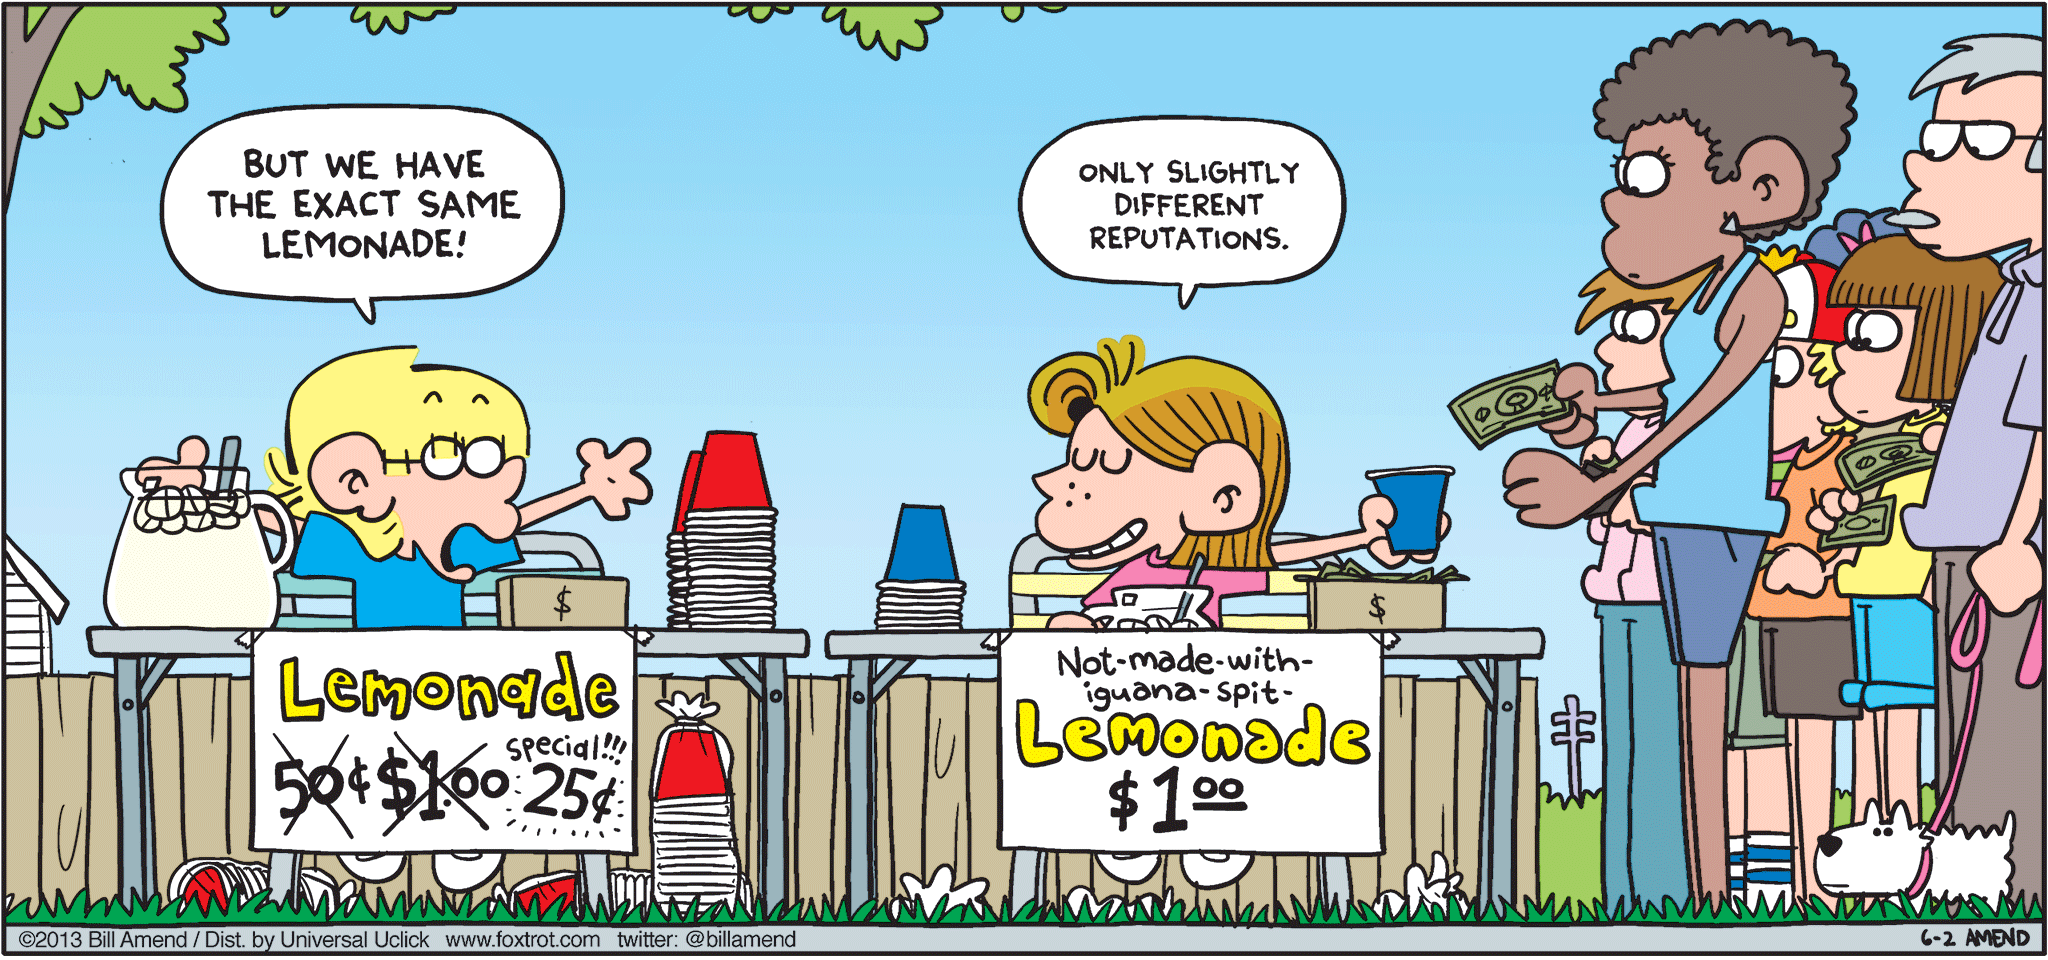 FoxTrot by Bill Amend - "Don’t Be Sour" published June 2, 2013 - Jason: But we have the exact same lemonade! Eileen: Only slightly different reputations.